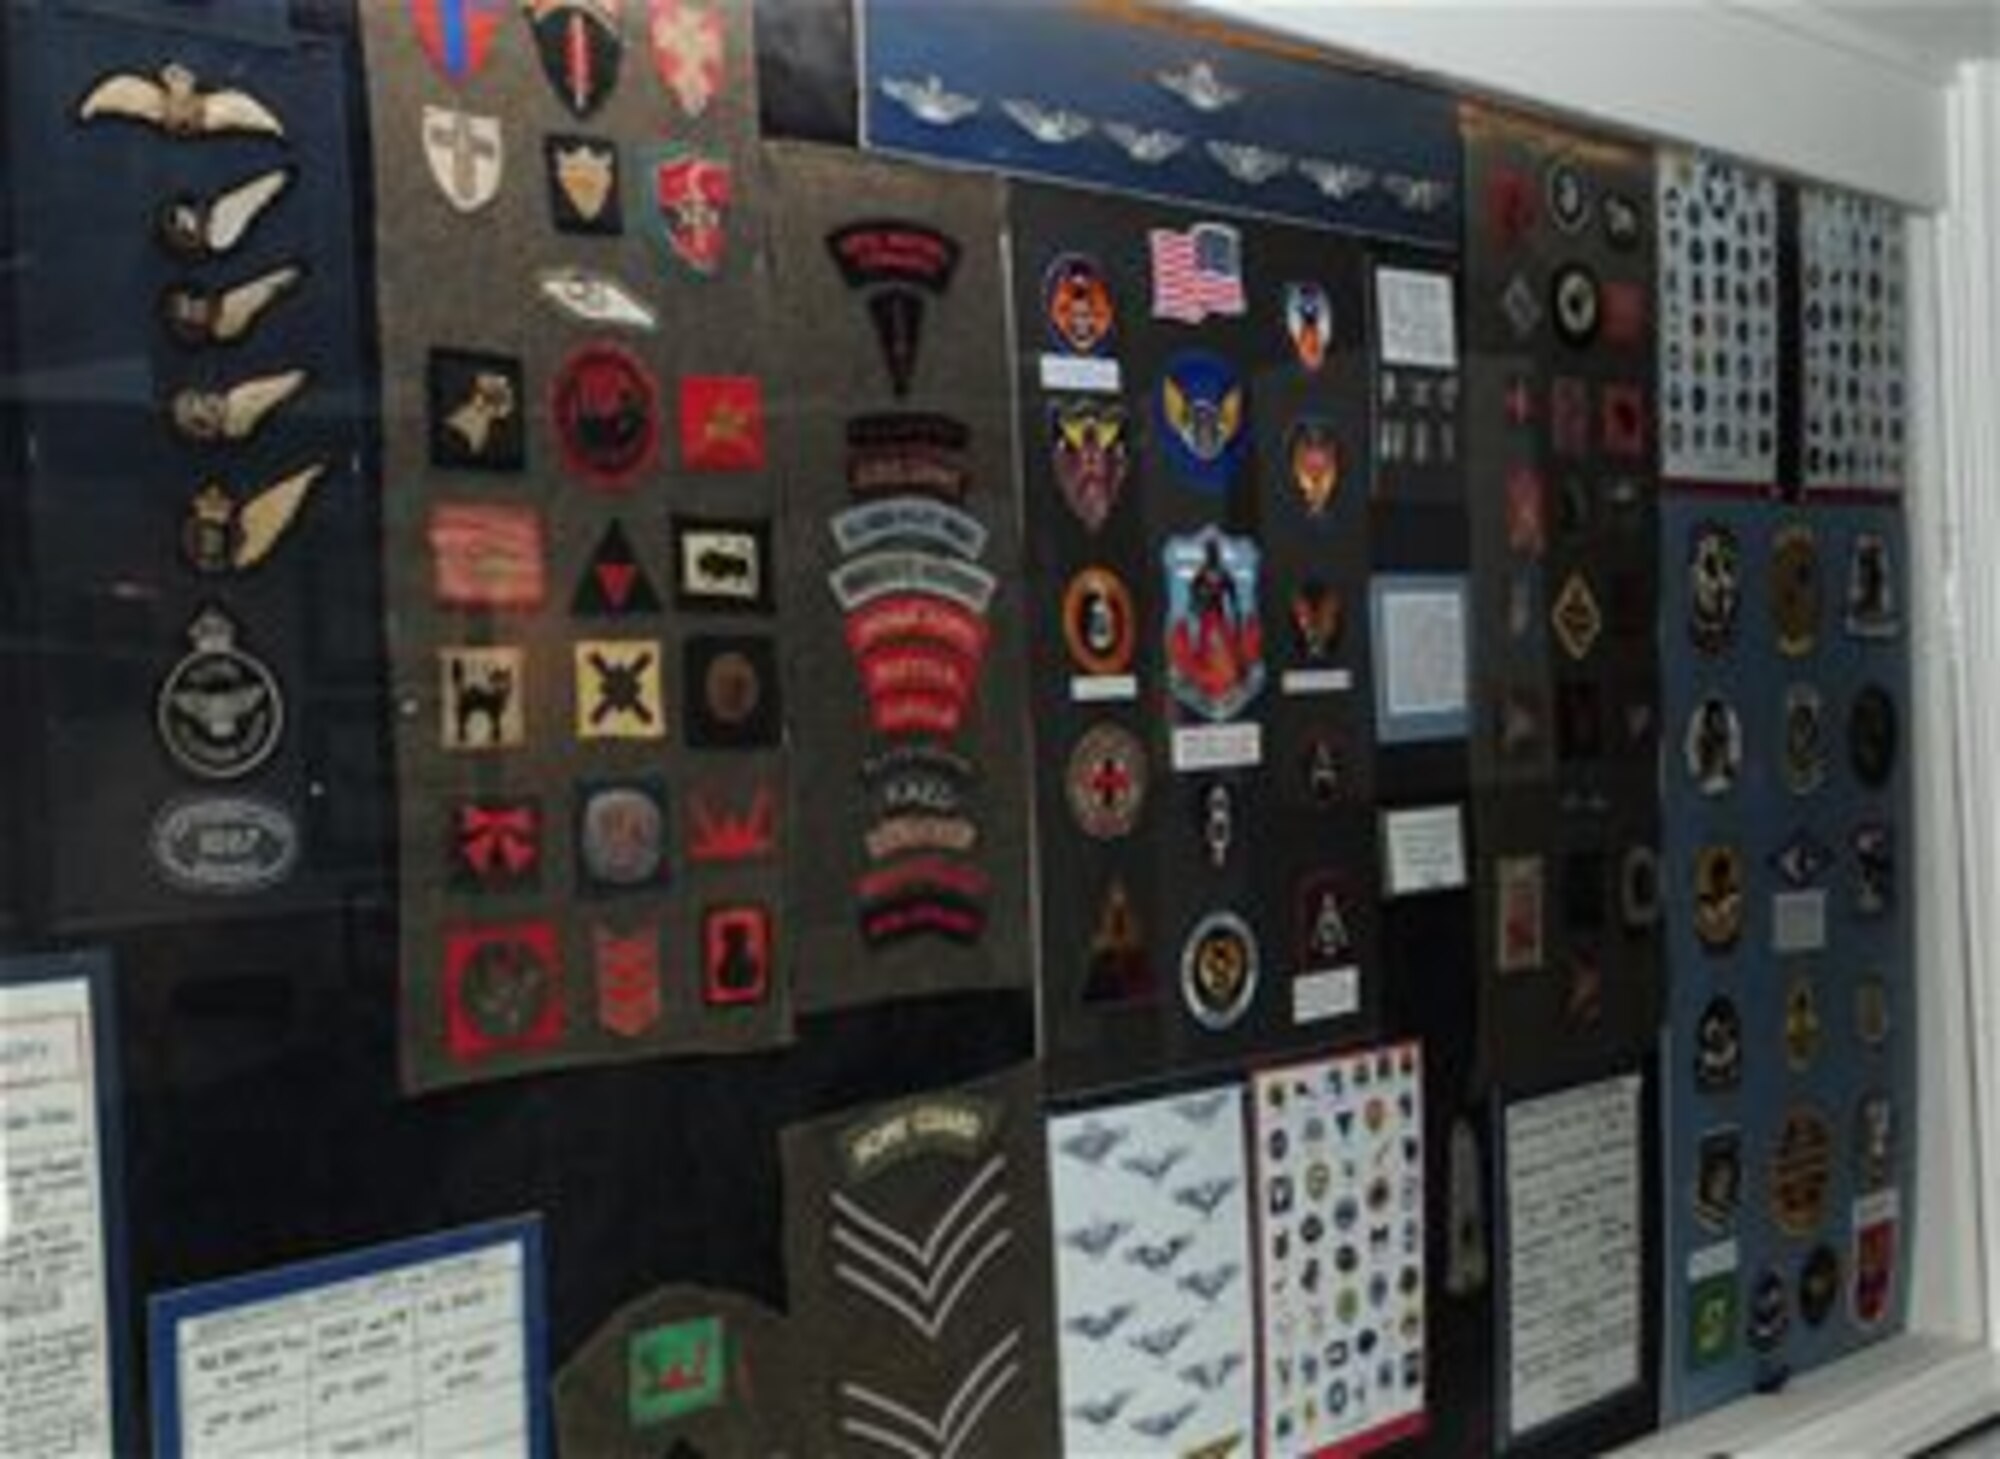 Stripes, patches and other U.S. Air Force memorabilia are on display inside the "Airmen's Bar" at The Swan in Lavenham, Suffolk. The former inn, now a hotel, was a favourite haunt for American Airmen who were stationed at local bases during World War II, the nearest being the 487th Bomb Group in Lavenham. The town is proud of its ties and long relationship with the U.S. Air Force, and the American flag is on display in the local church, honouring those fallen in World War II. (U.S. Air Force photo by Karen Abeyasekere/Released)